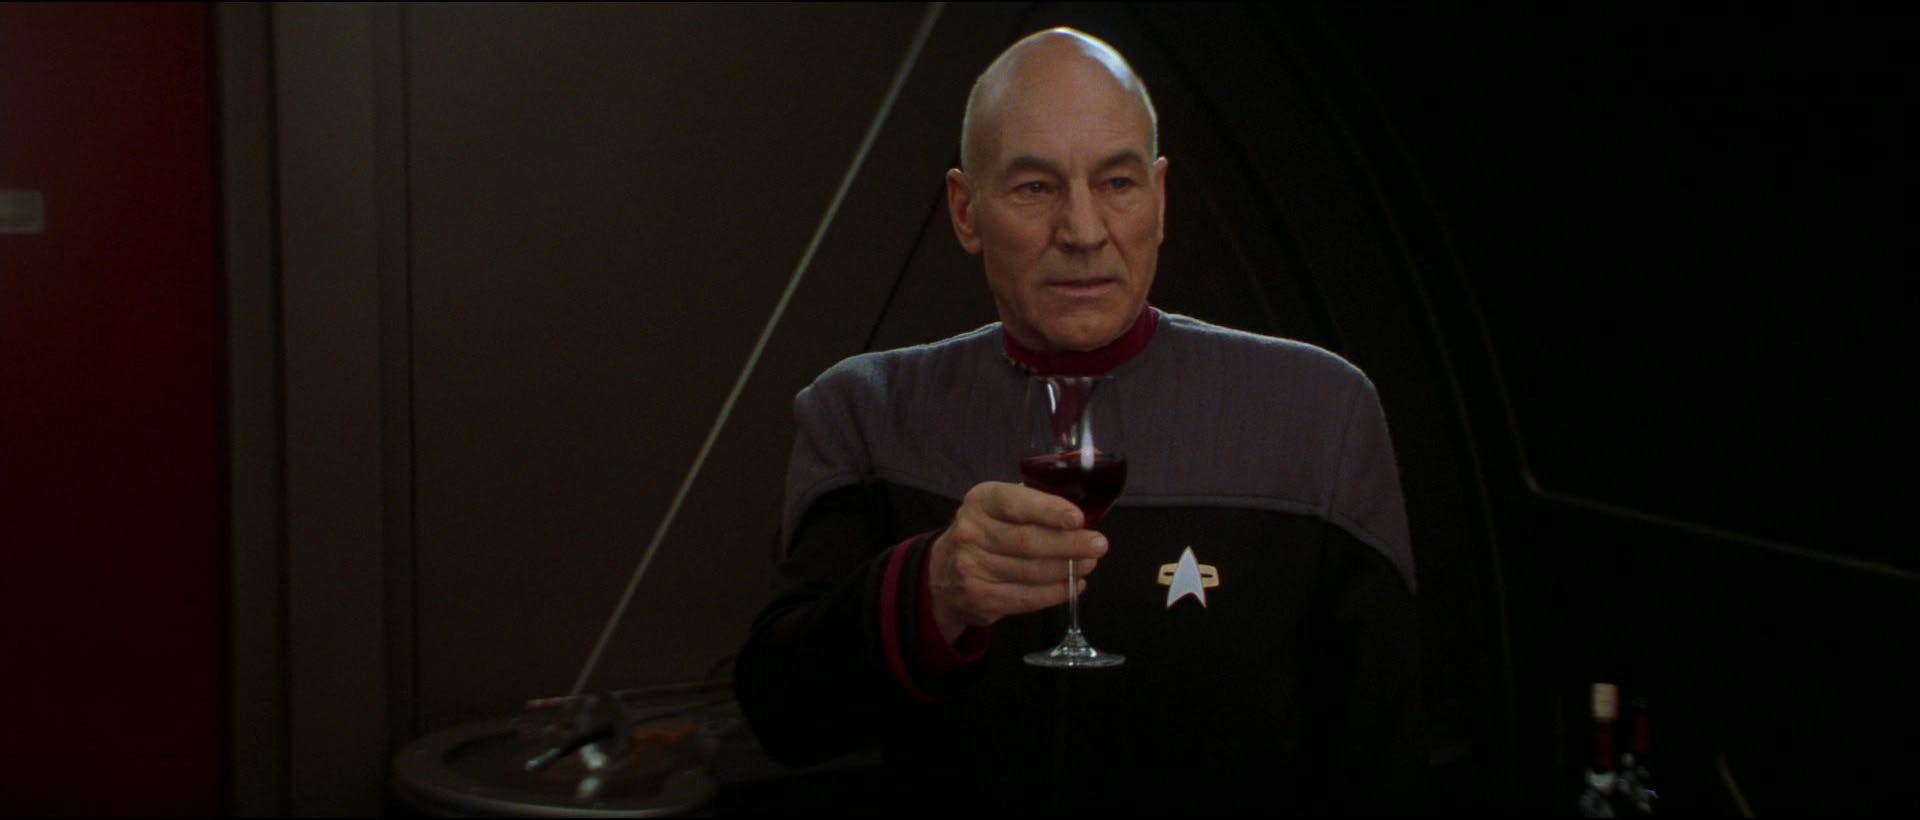 In Picard's quarters, he raises a glass to the crew among him (La Forge, Crusher, Worf, Troi, Riker) in a solemn tribute to their fallen friend Data in Star Trek Nemesis